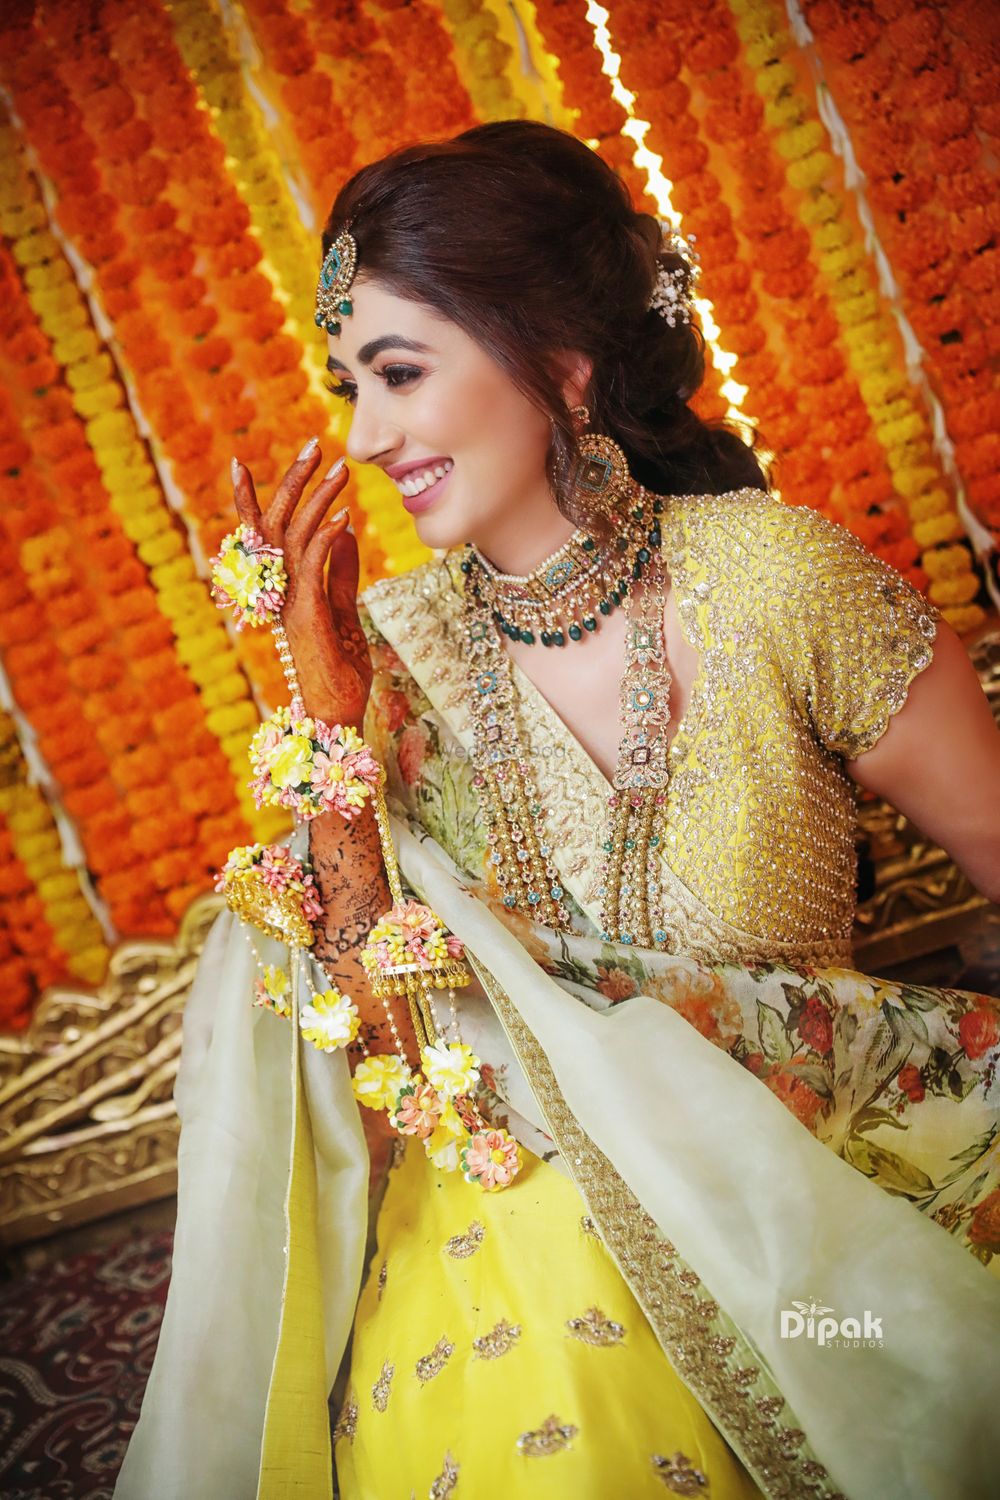 Photo of A bride-to-be wearing matching yellow floral kaleere with her yellow mehndi lehenga